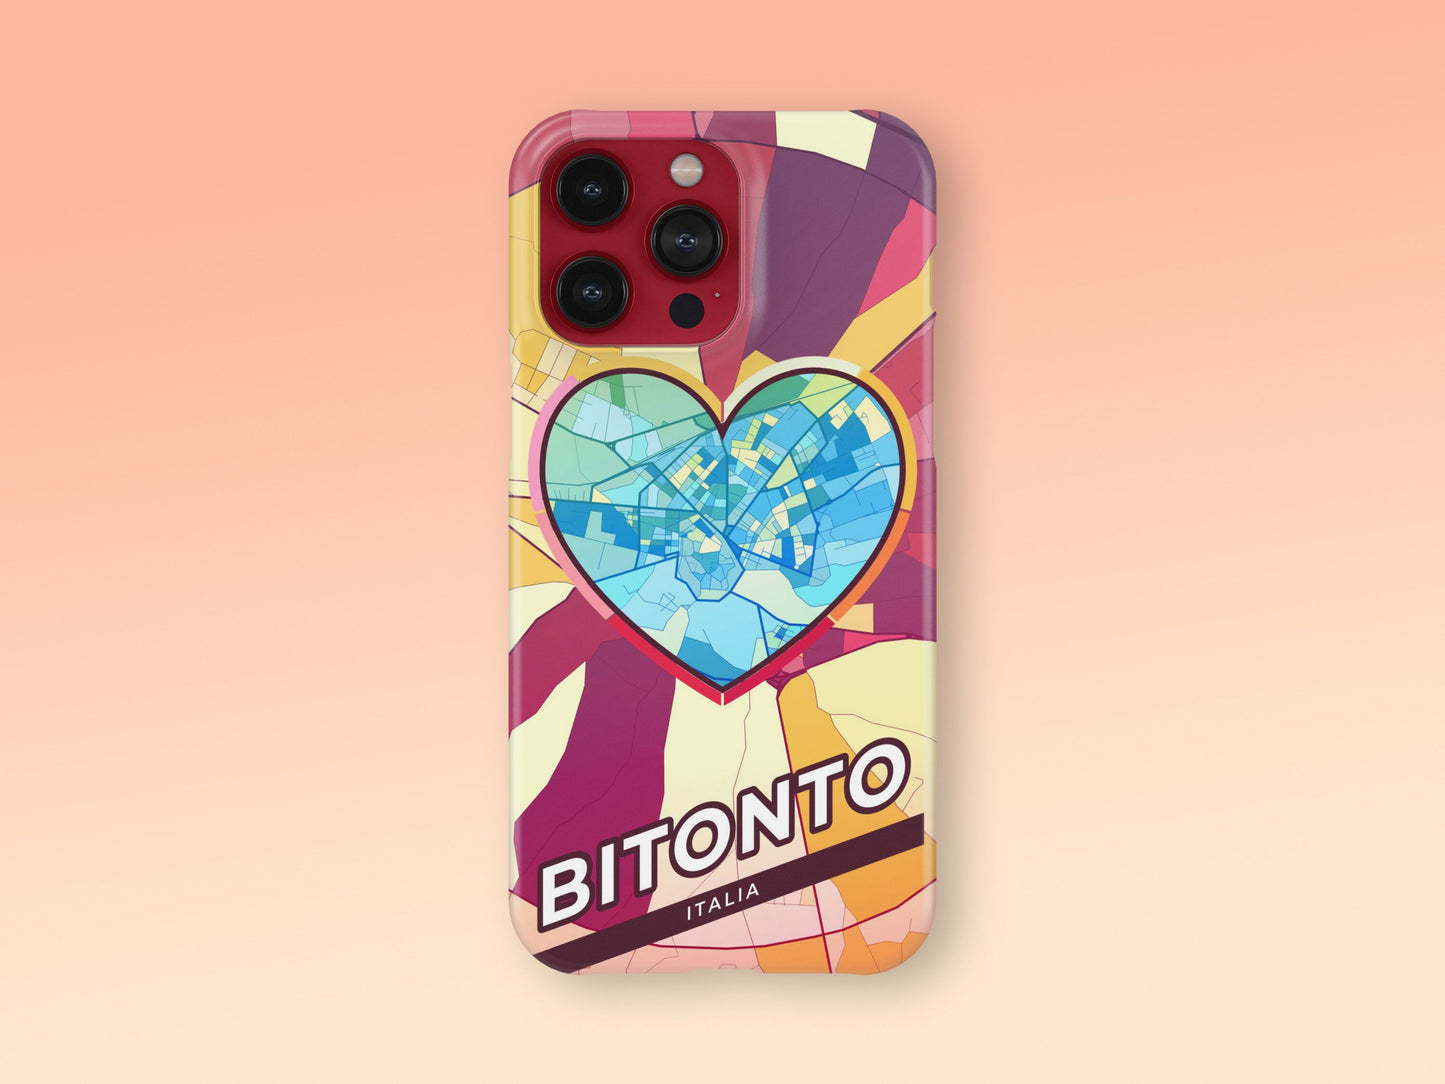 Bitonto Italy slim phone case with colorful icon. Birthday, wedding or housewarming gift. Couple match cases. 2